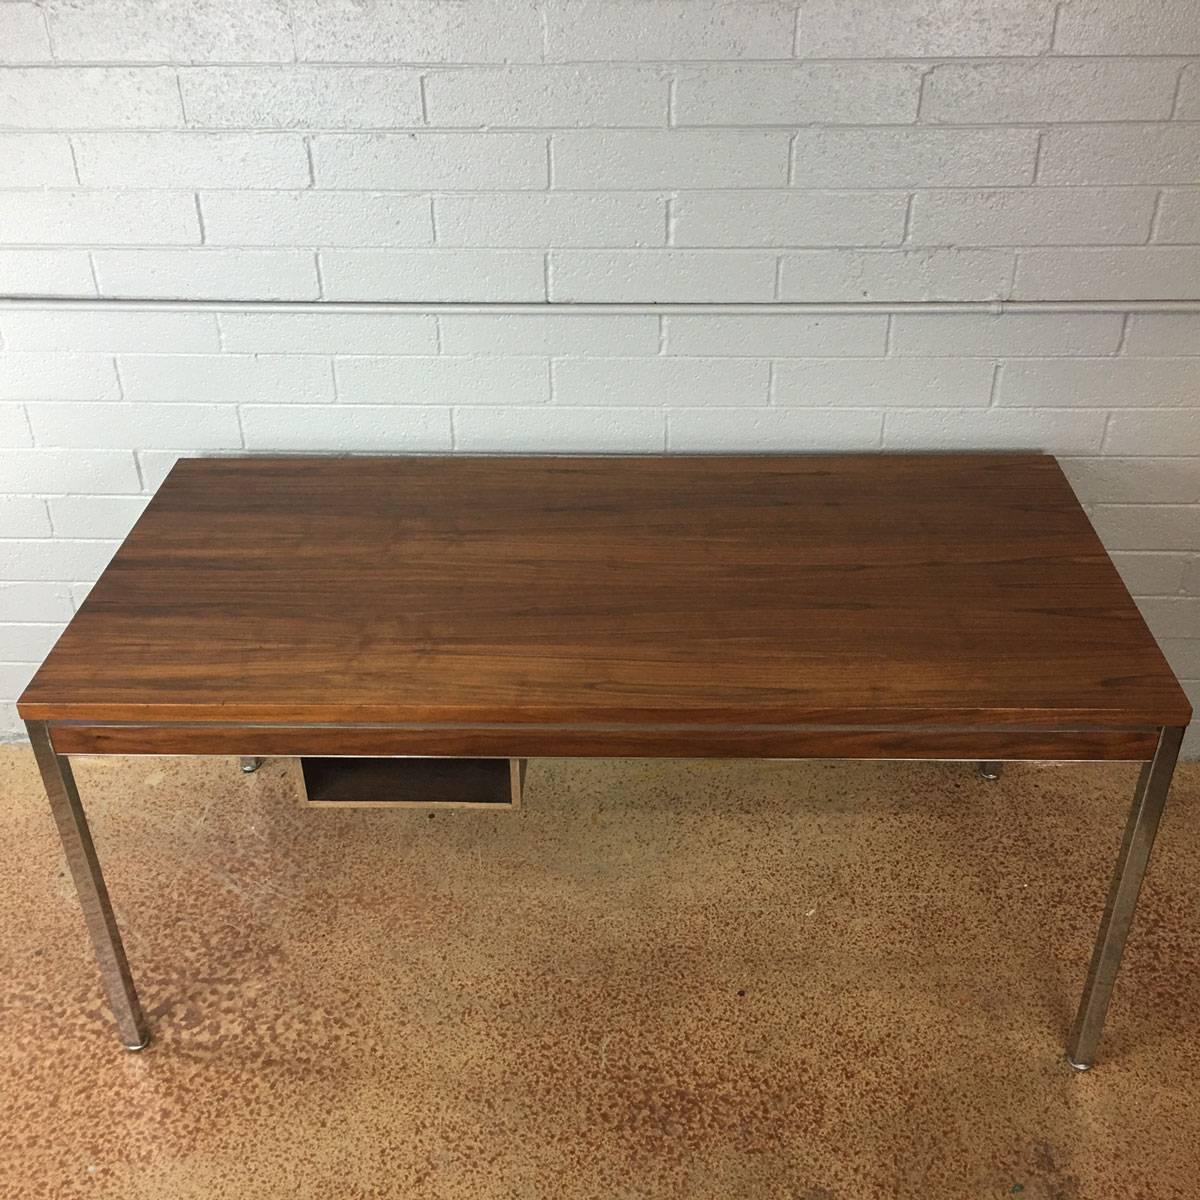 This beautiful simple walnut and chrome desk and also function as a small dining table or a conference table. Walnut top. Chrome accents with original glides. This unit may be Florence Knoll but it is no longer marked.